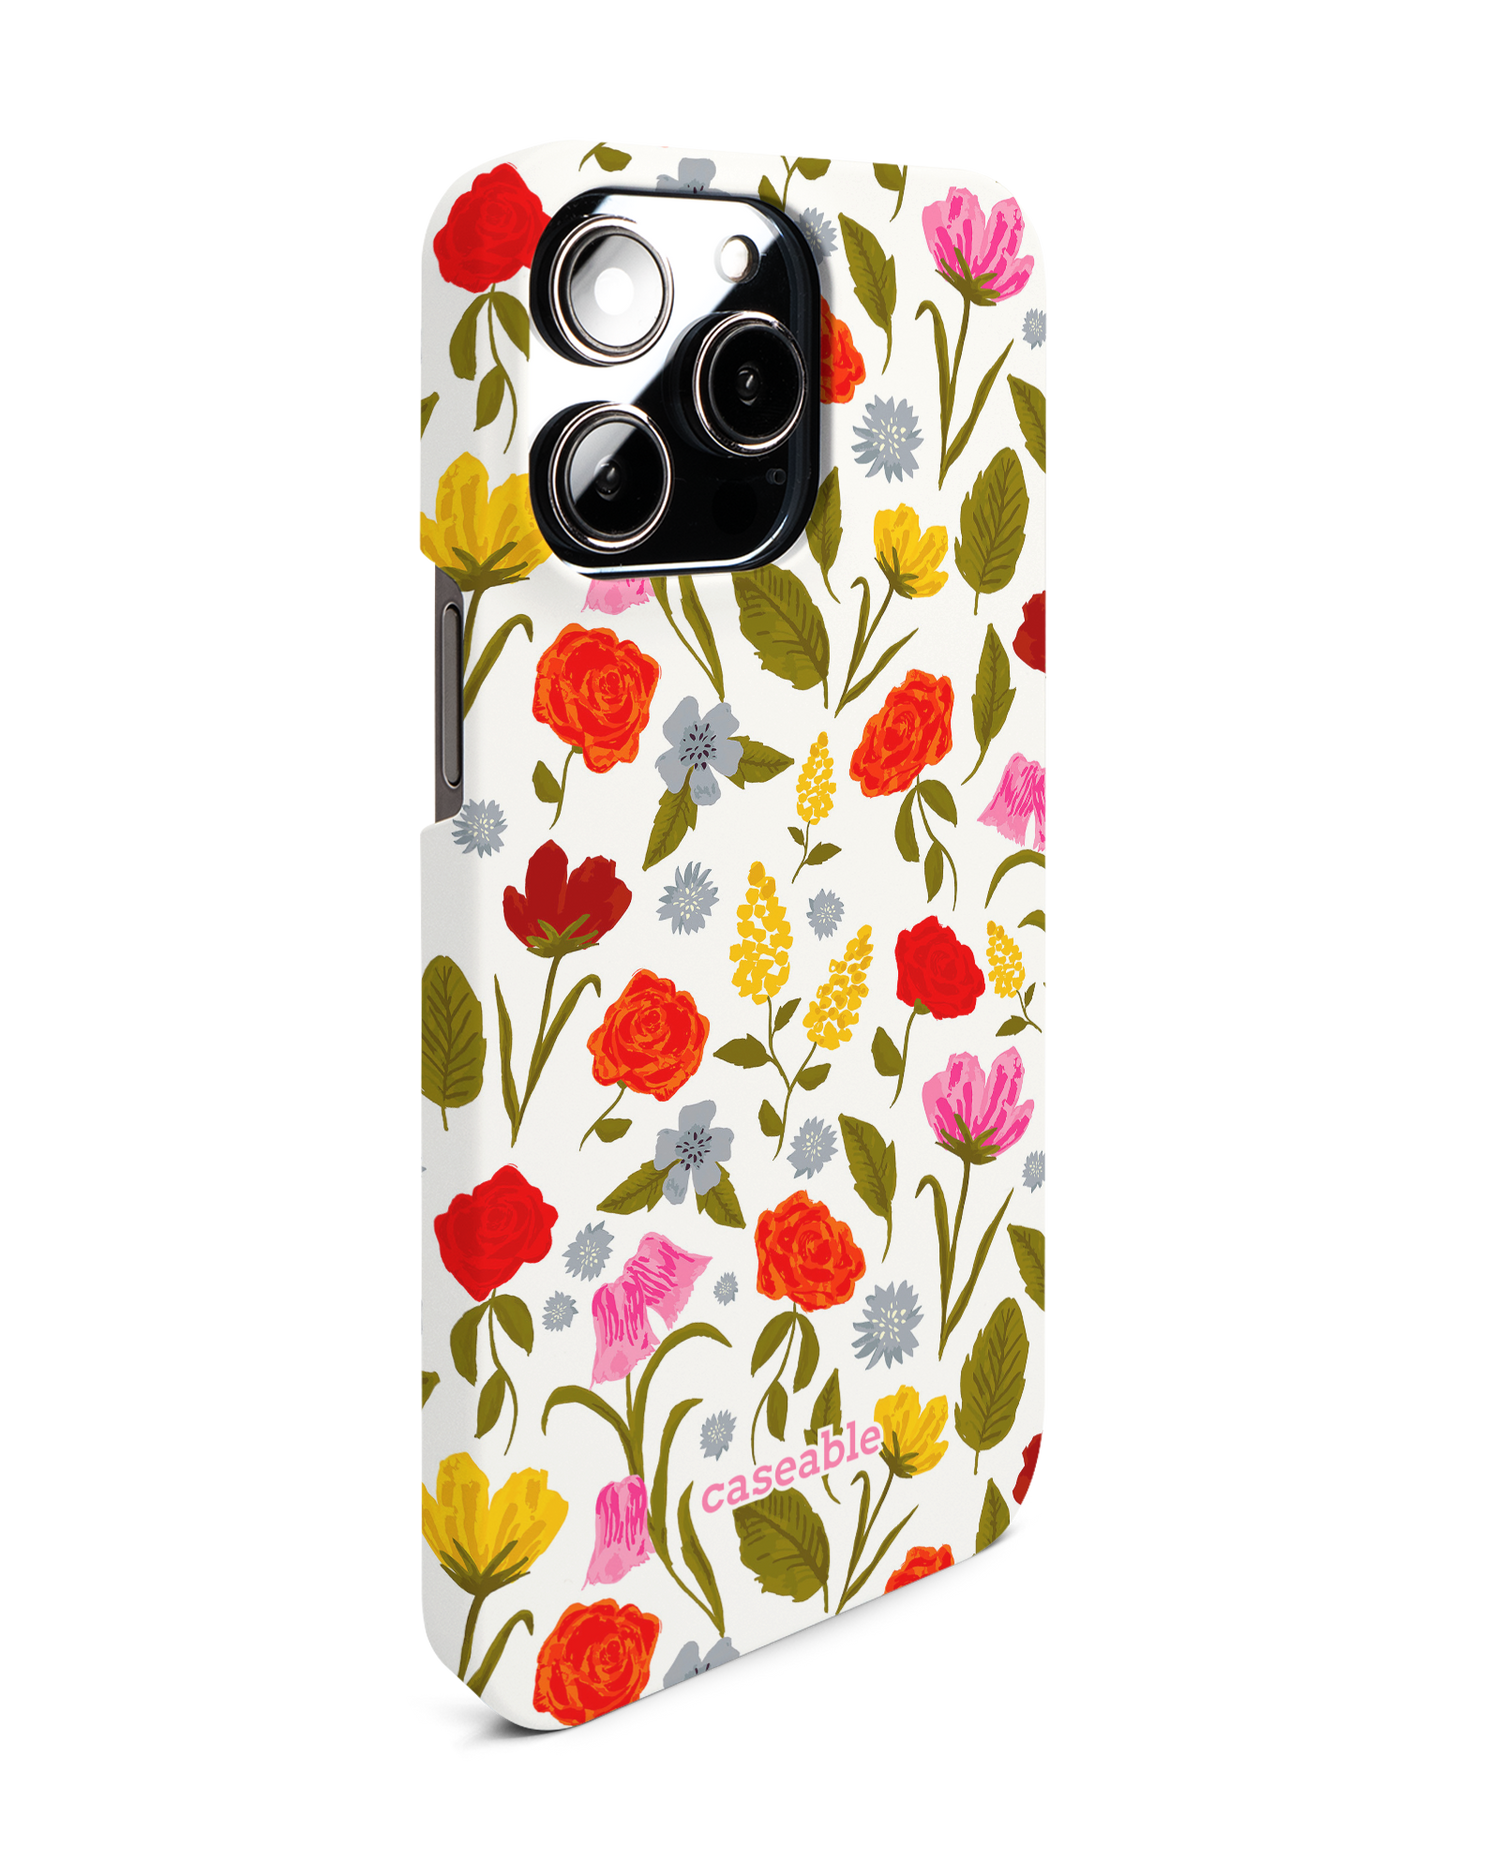 Botanical Beauties Hard Shell Phone Case for Apple iPhone 14 Pro Max: View from the left side